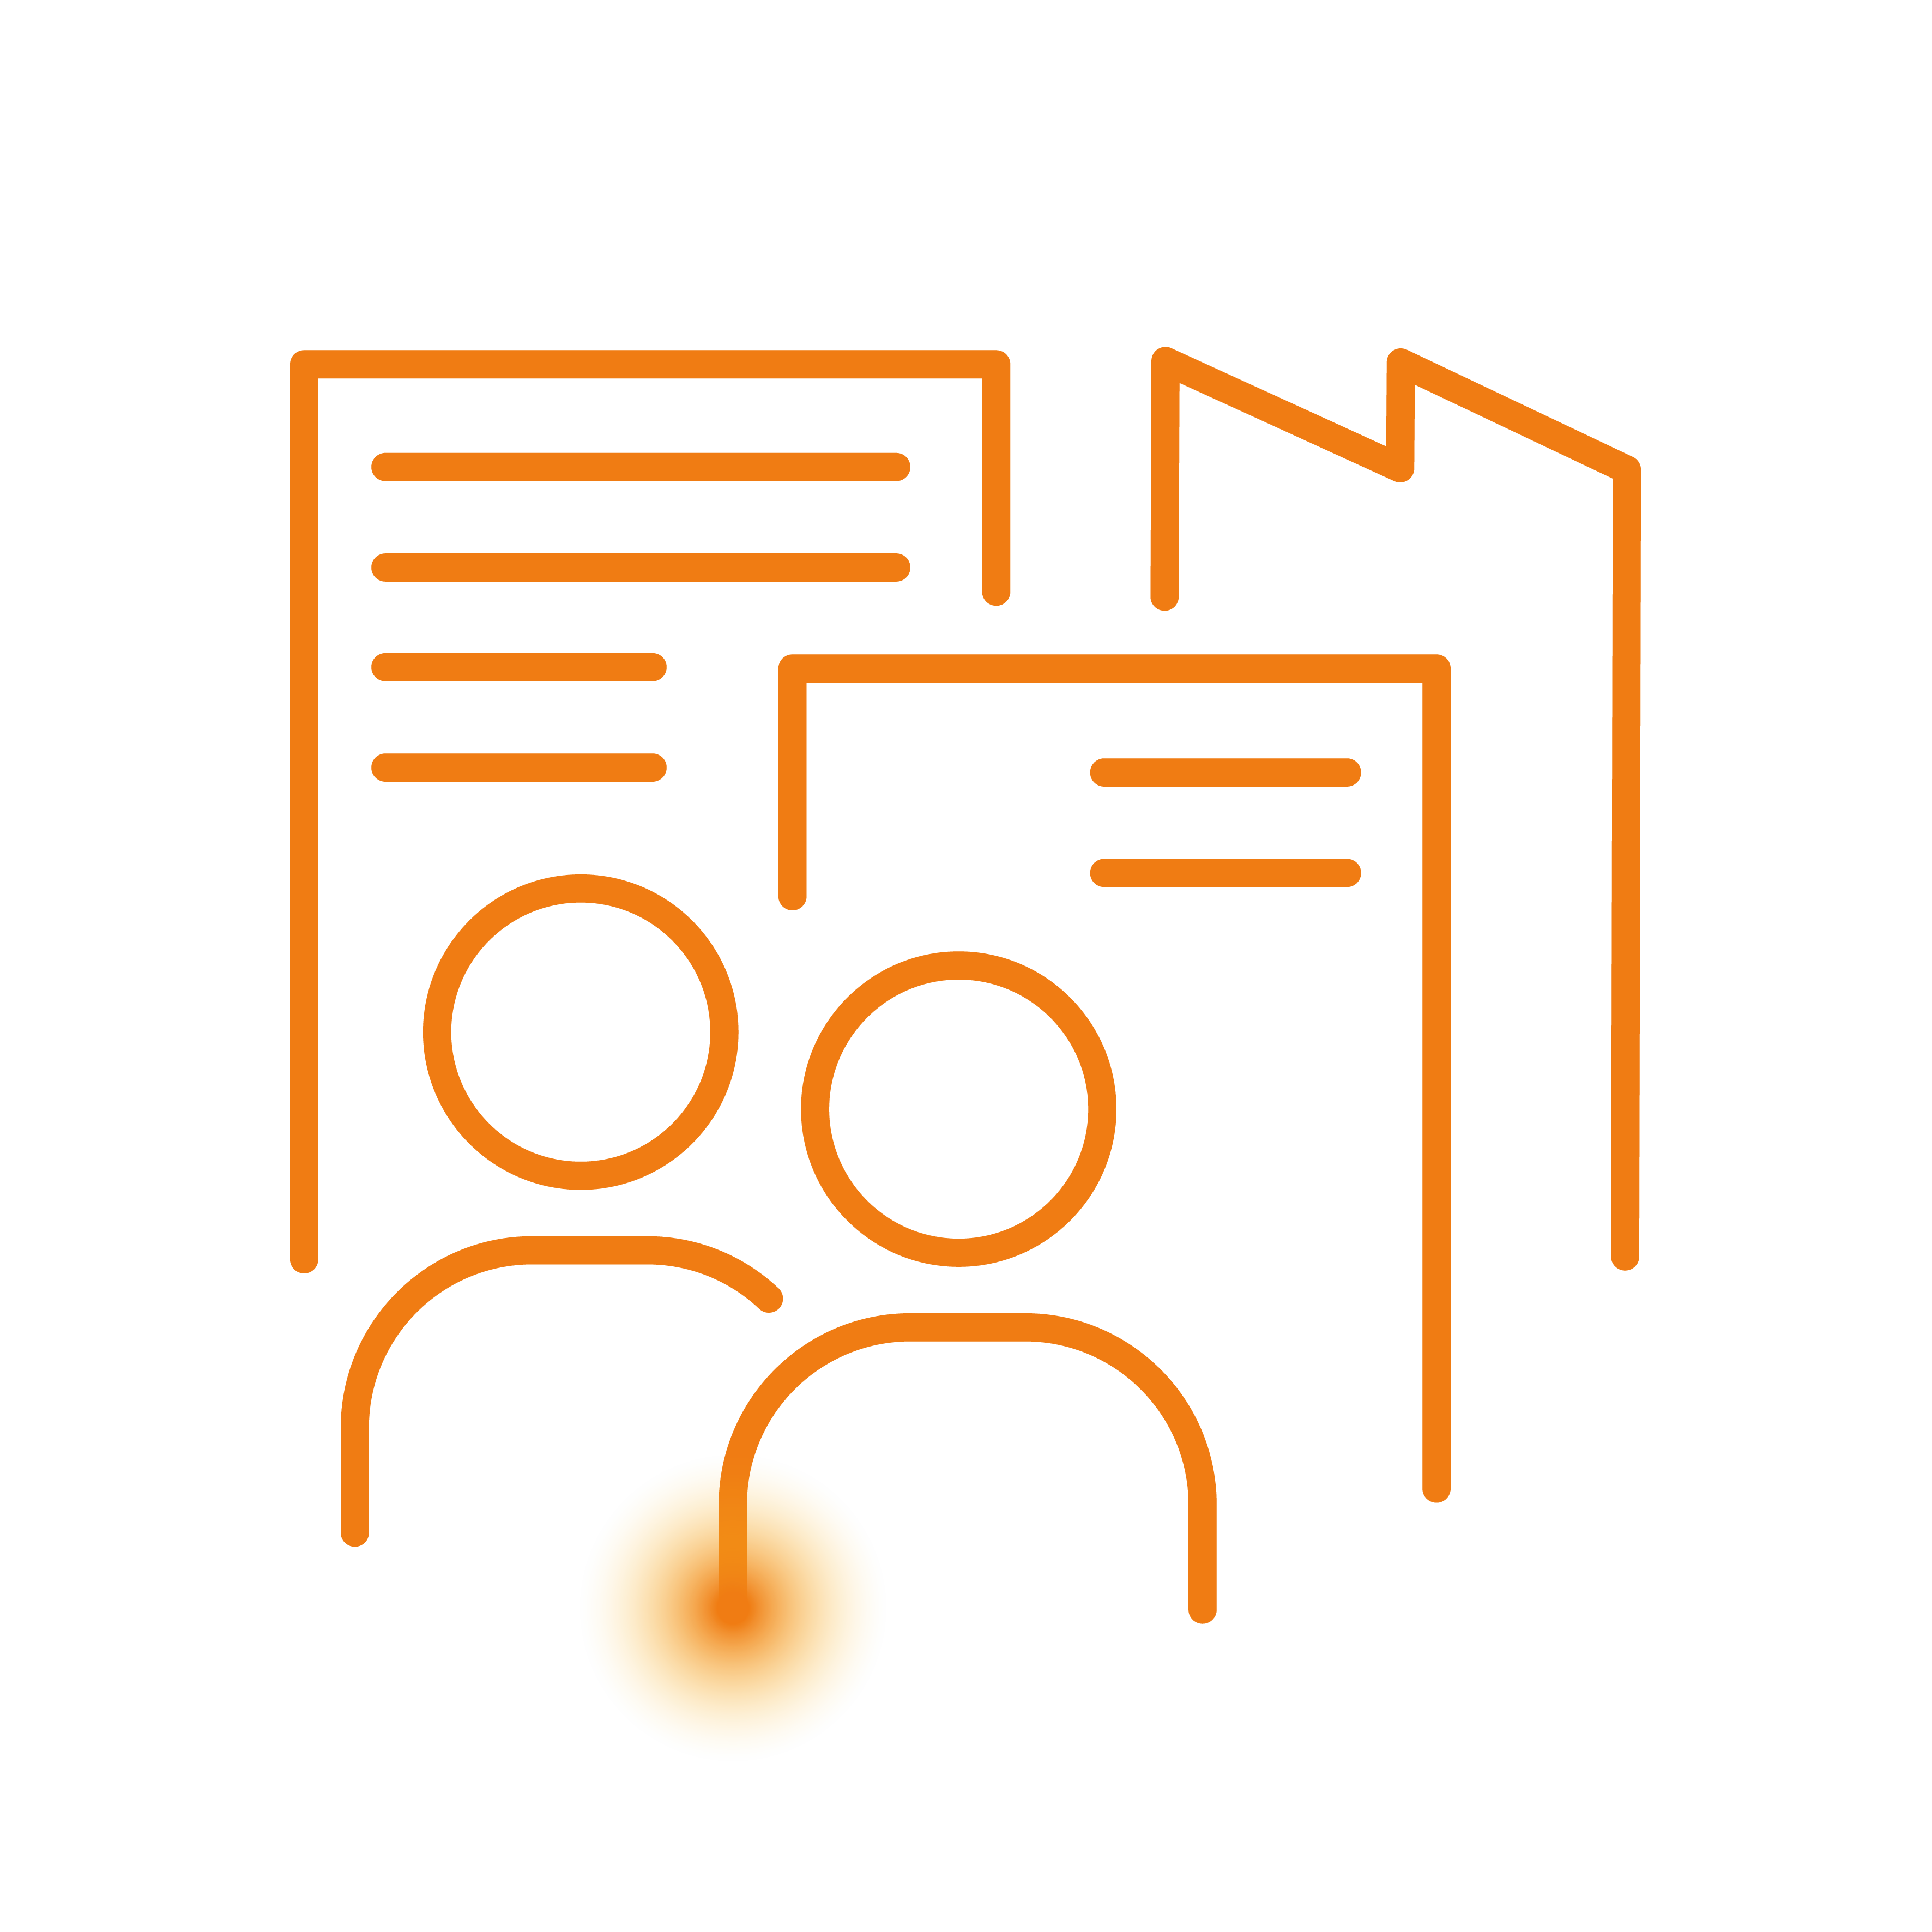 Final product icons-Workplace Evolution - Orange.png